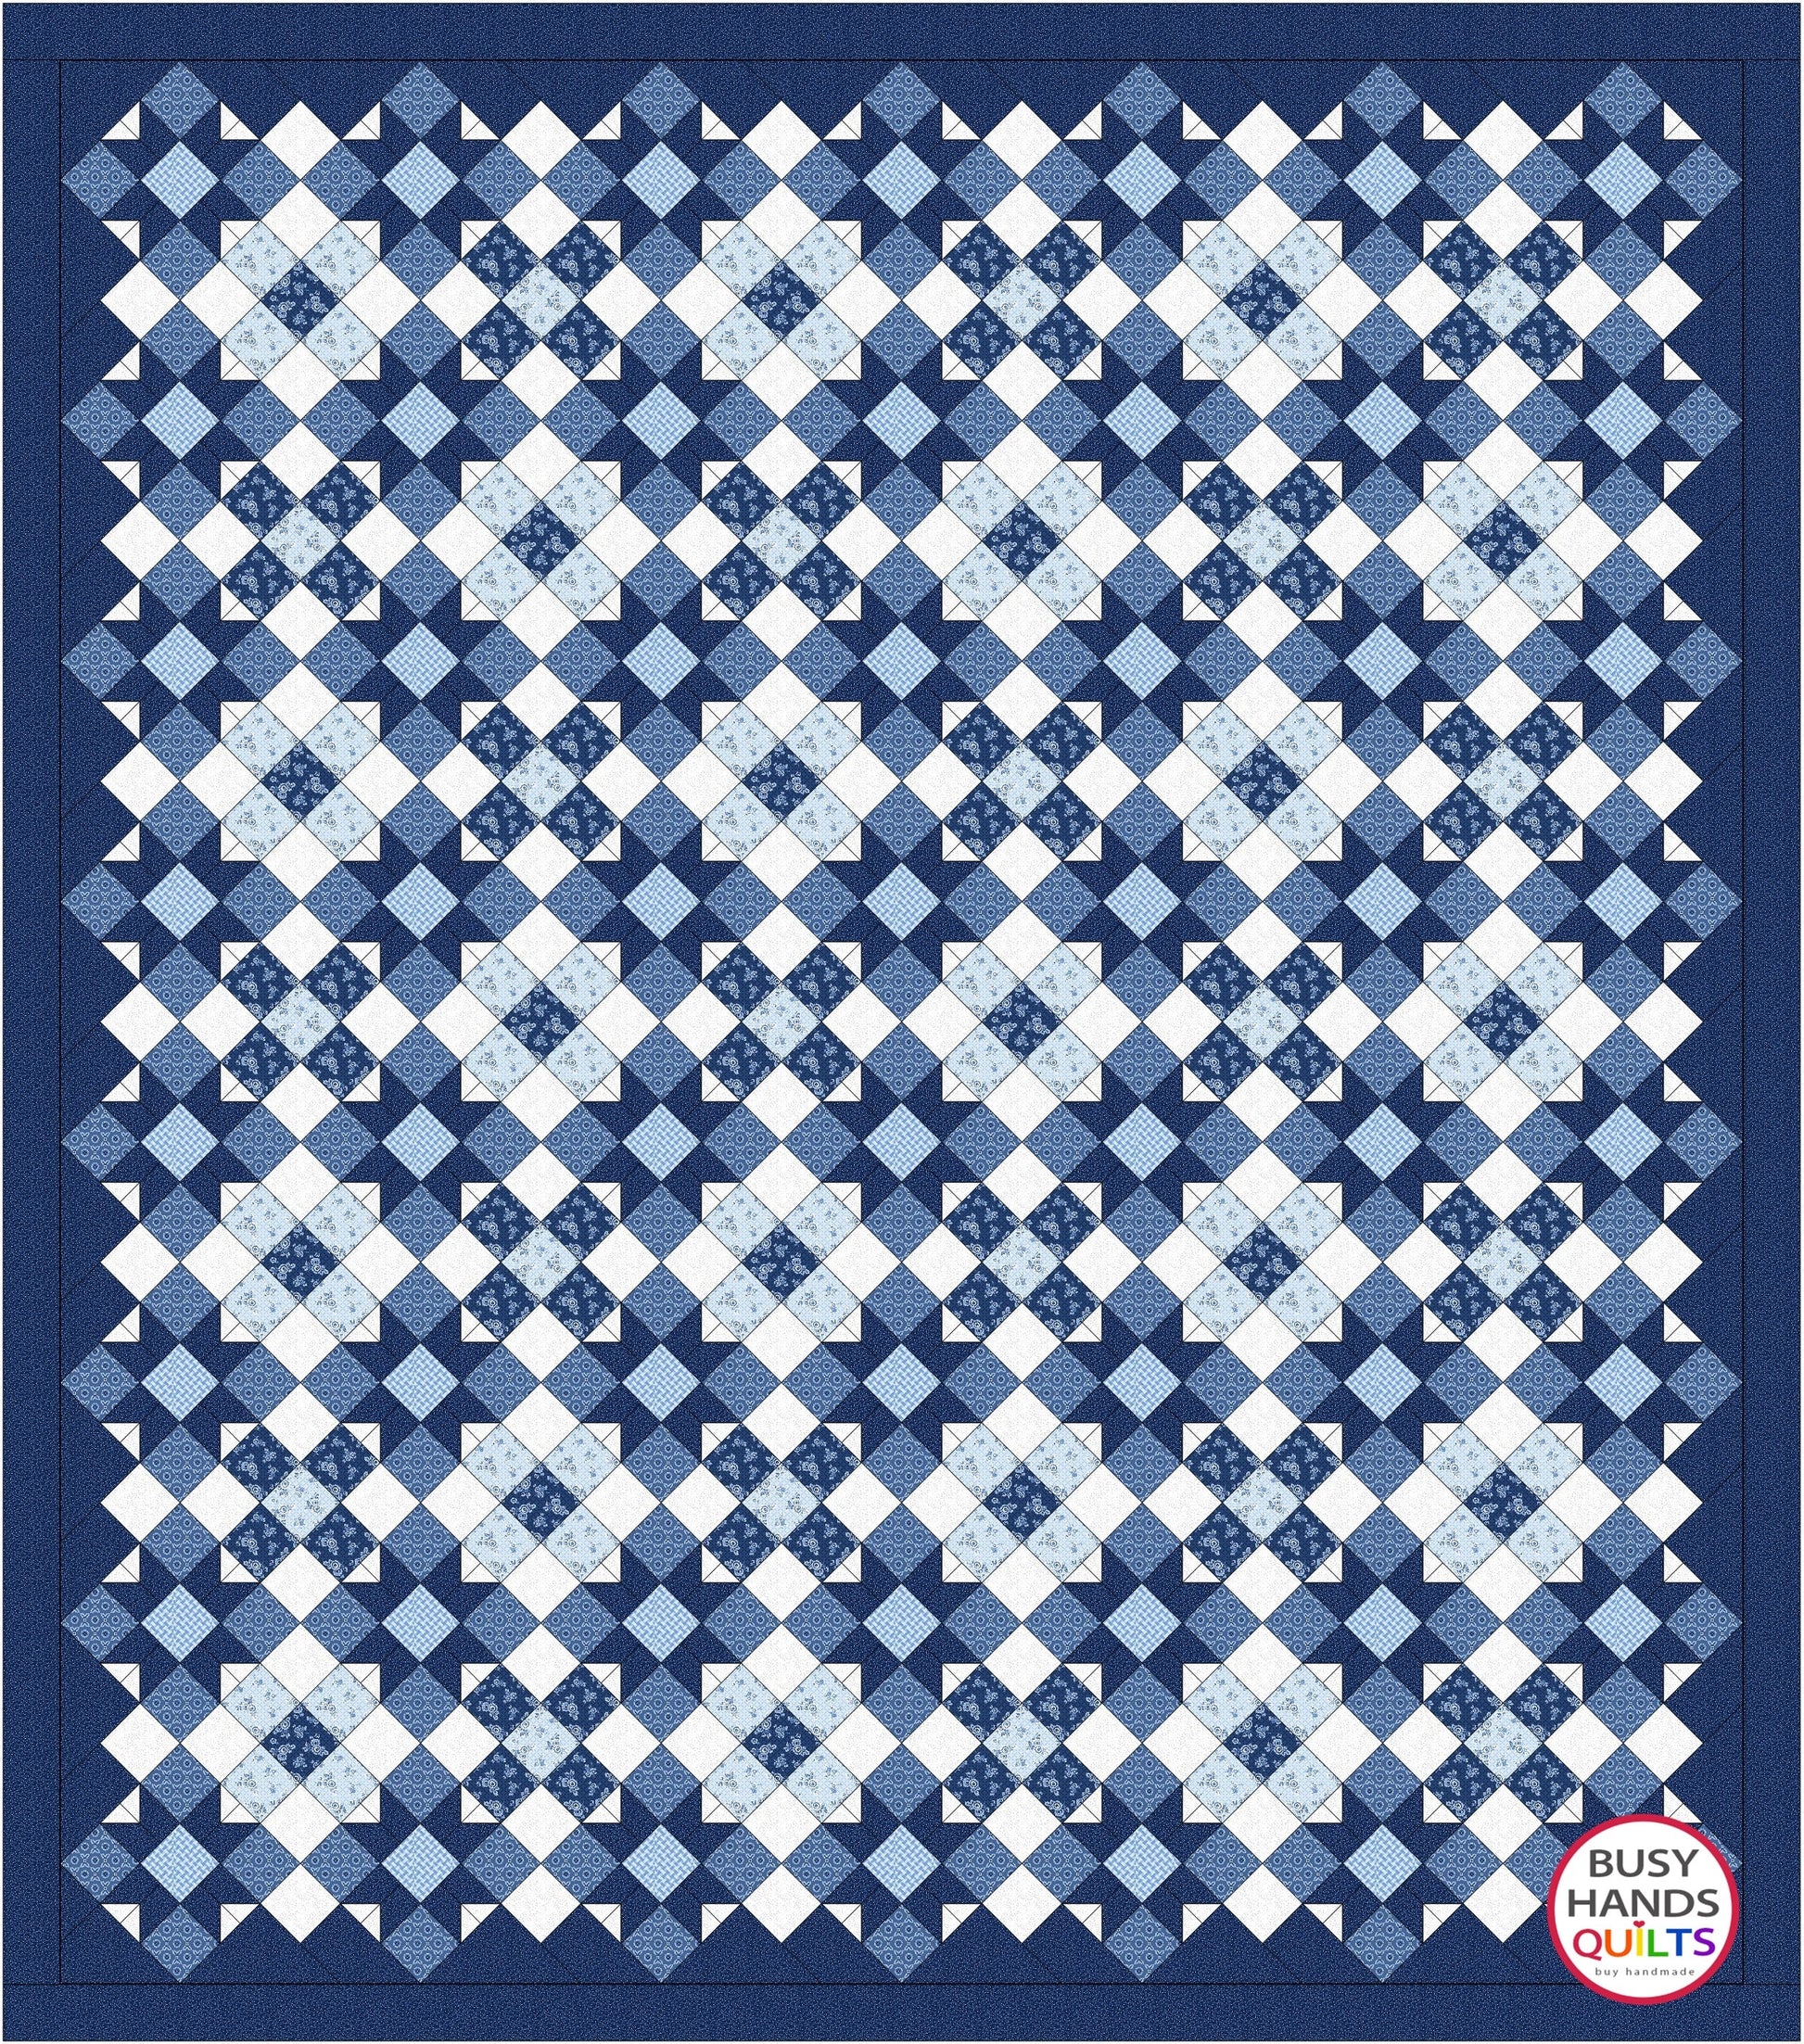 Calliope Quilt Pattern PDF DOWNLOAD Busy Hands Quilts $12.99